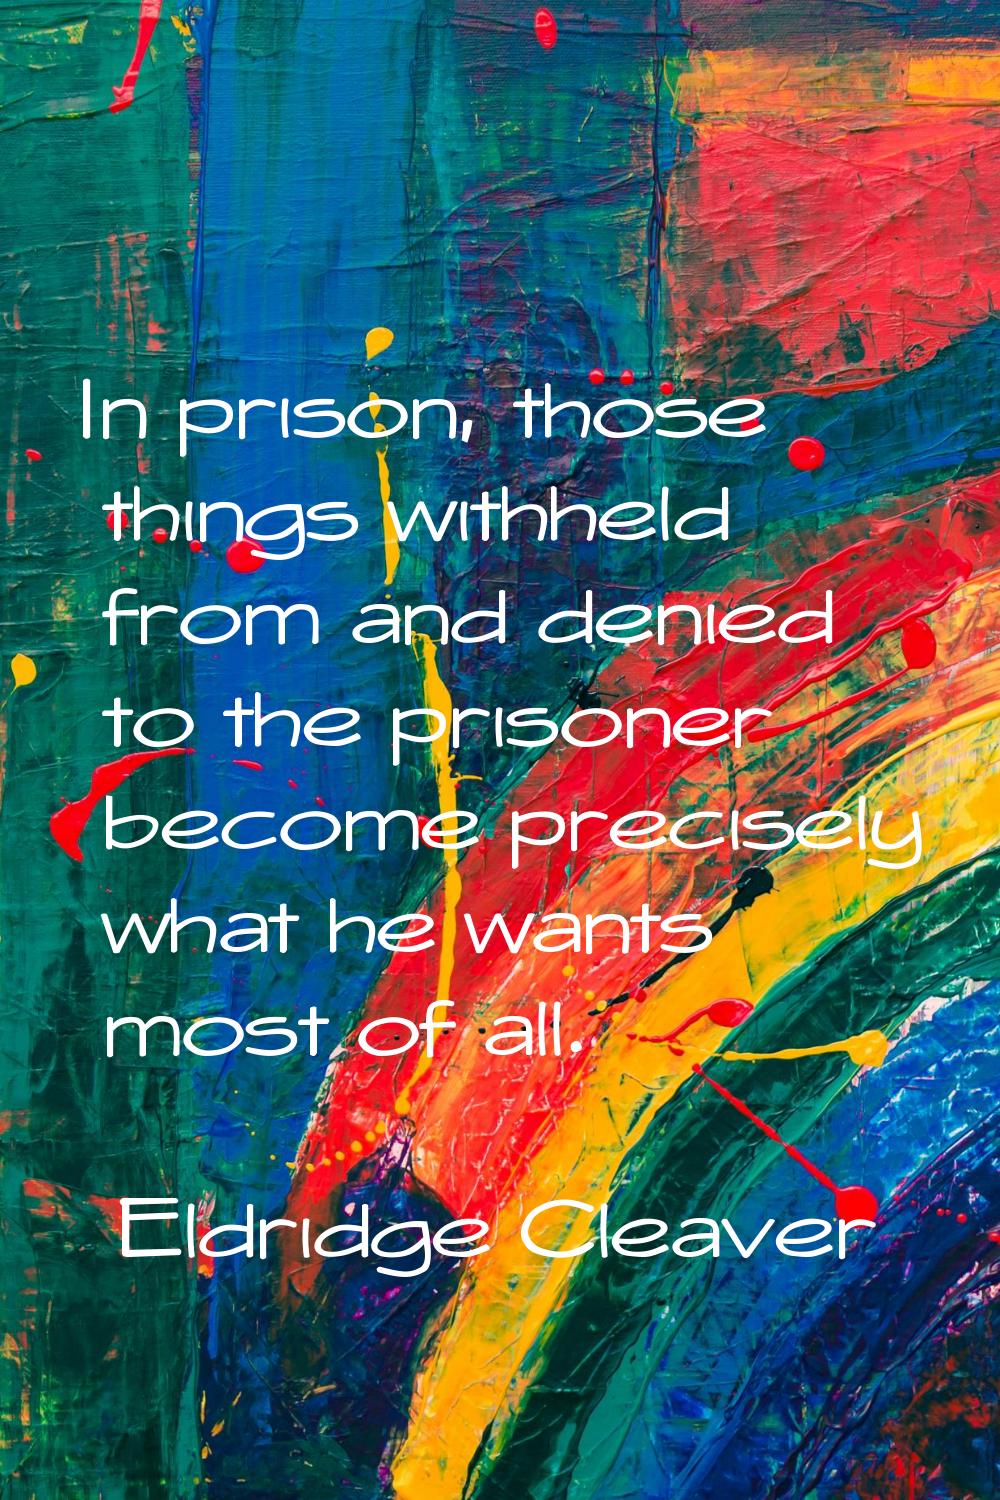 In prison, those things withheld from and denied to the prisoner become precisely what he wants mos